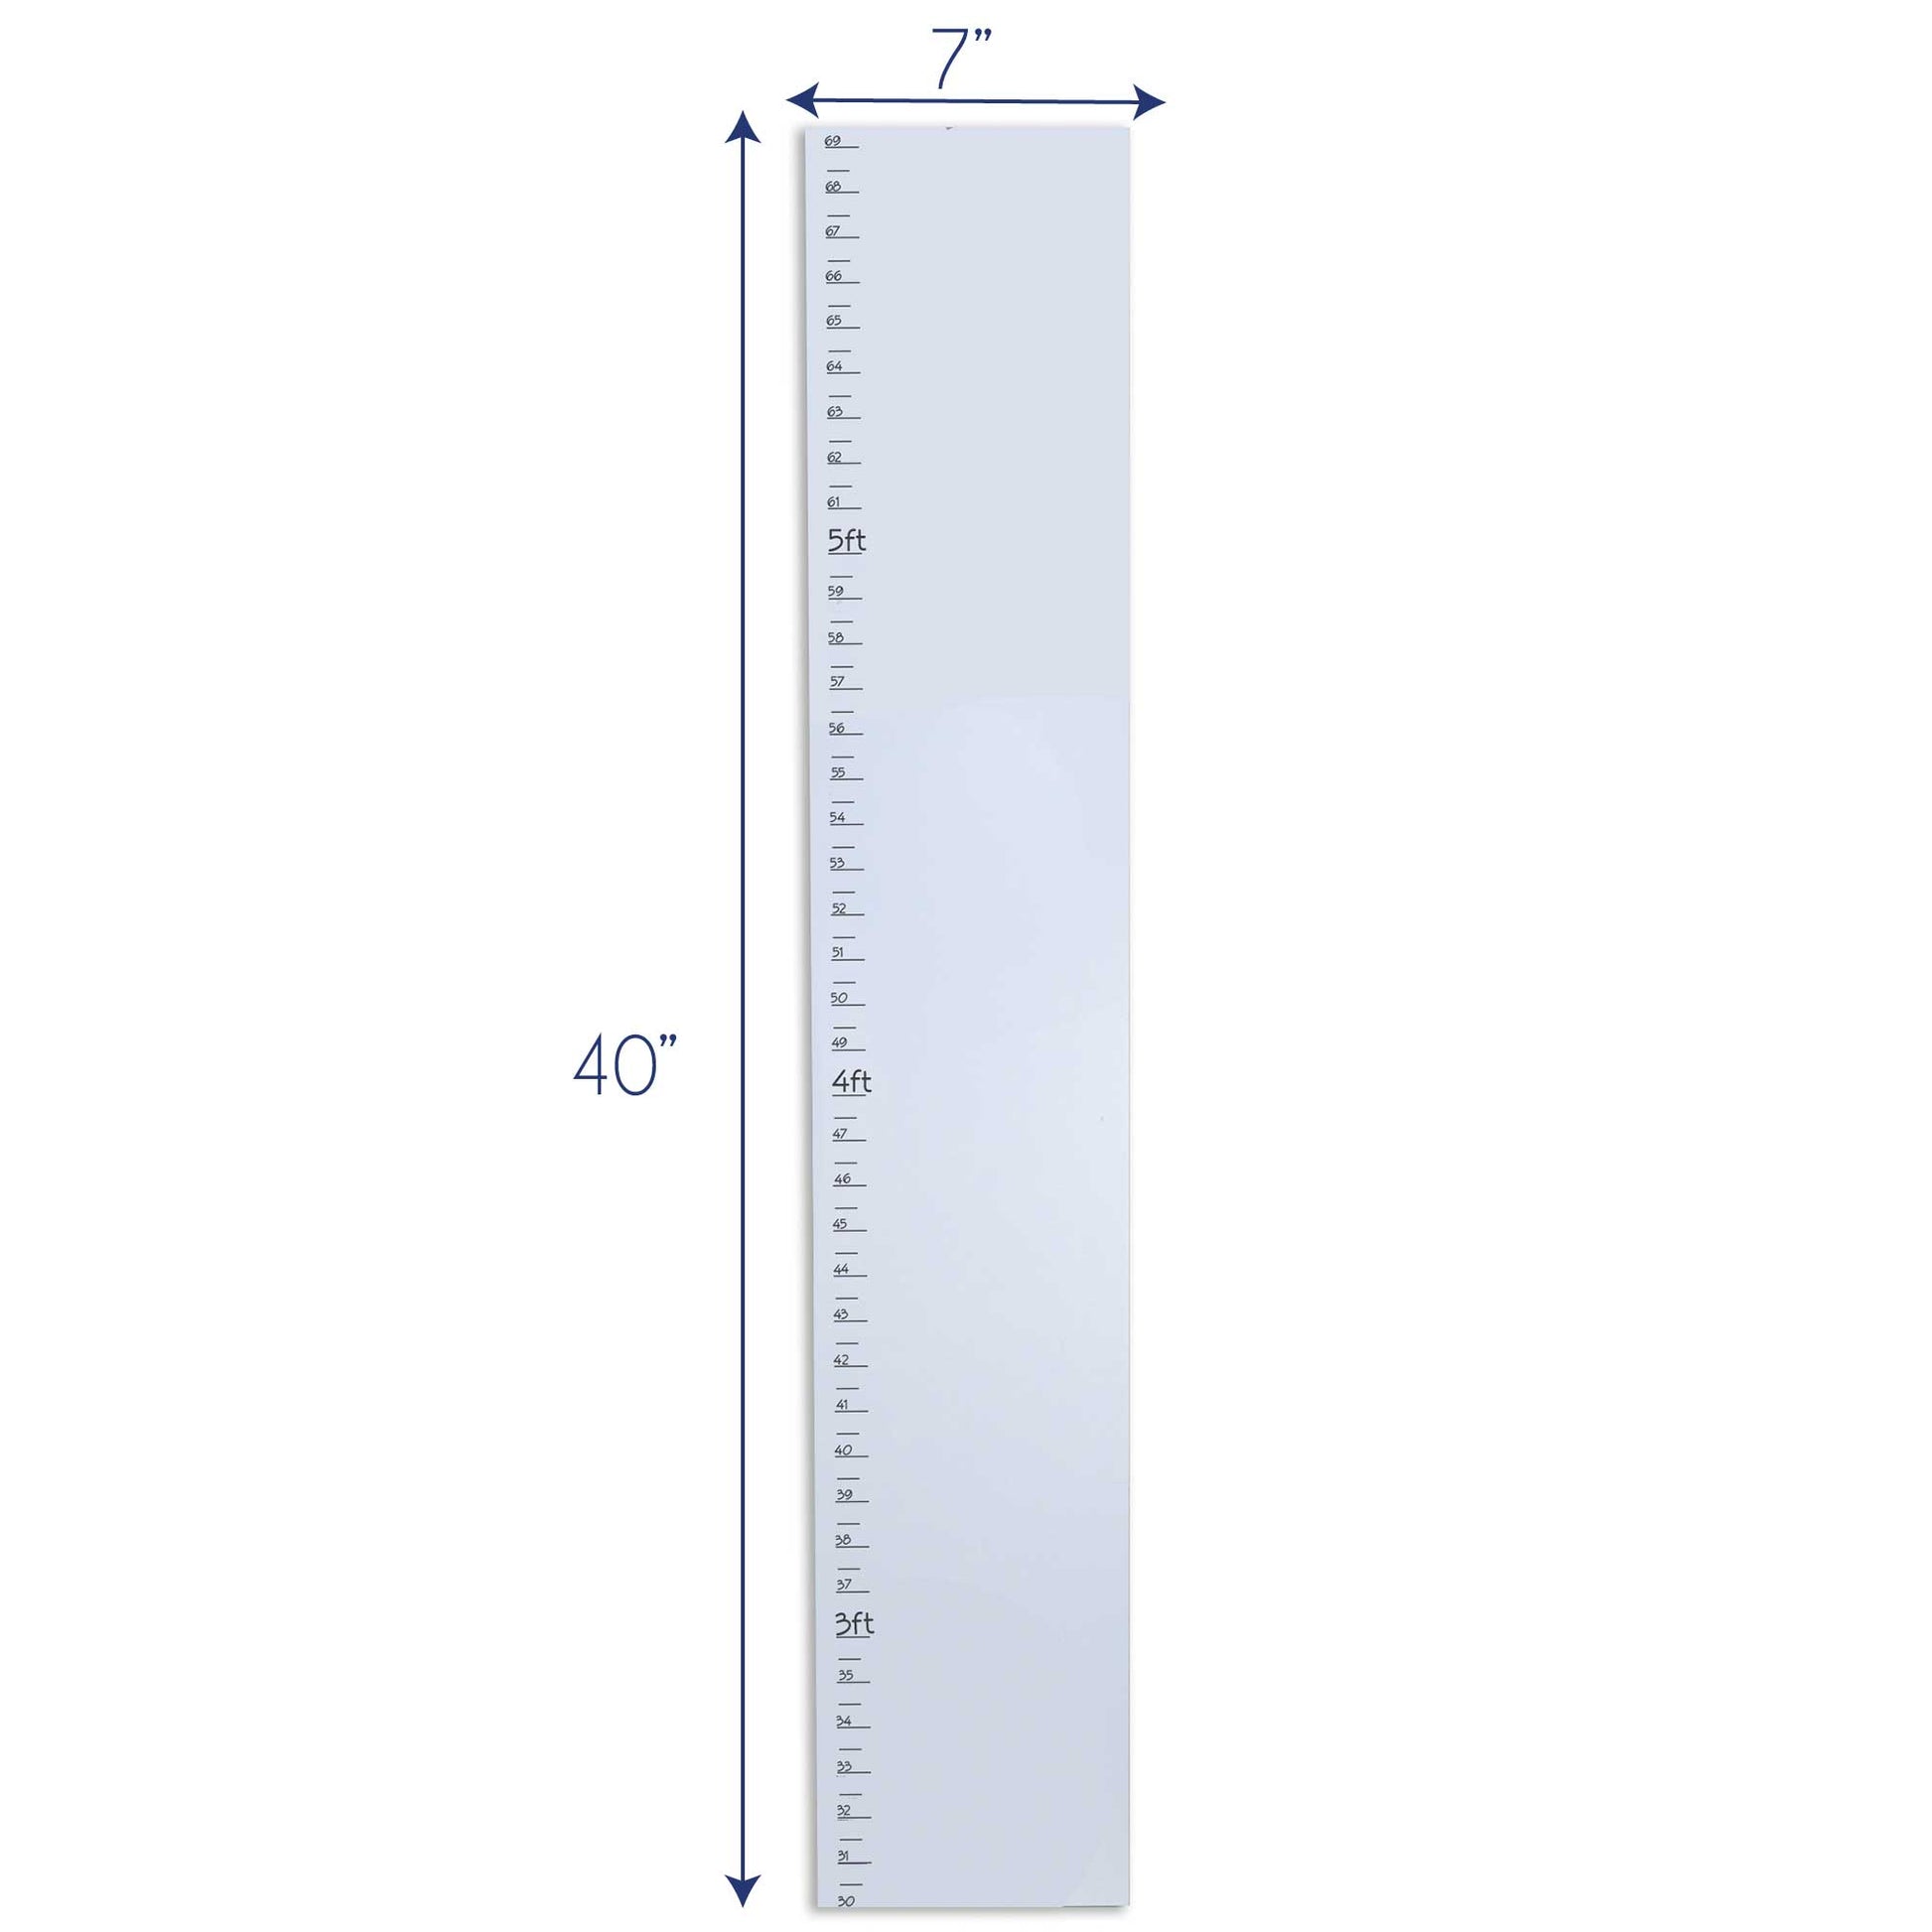 Personalized White Growth Chart With Basketball Design